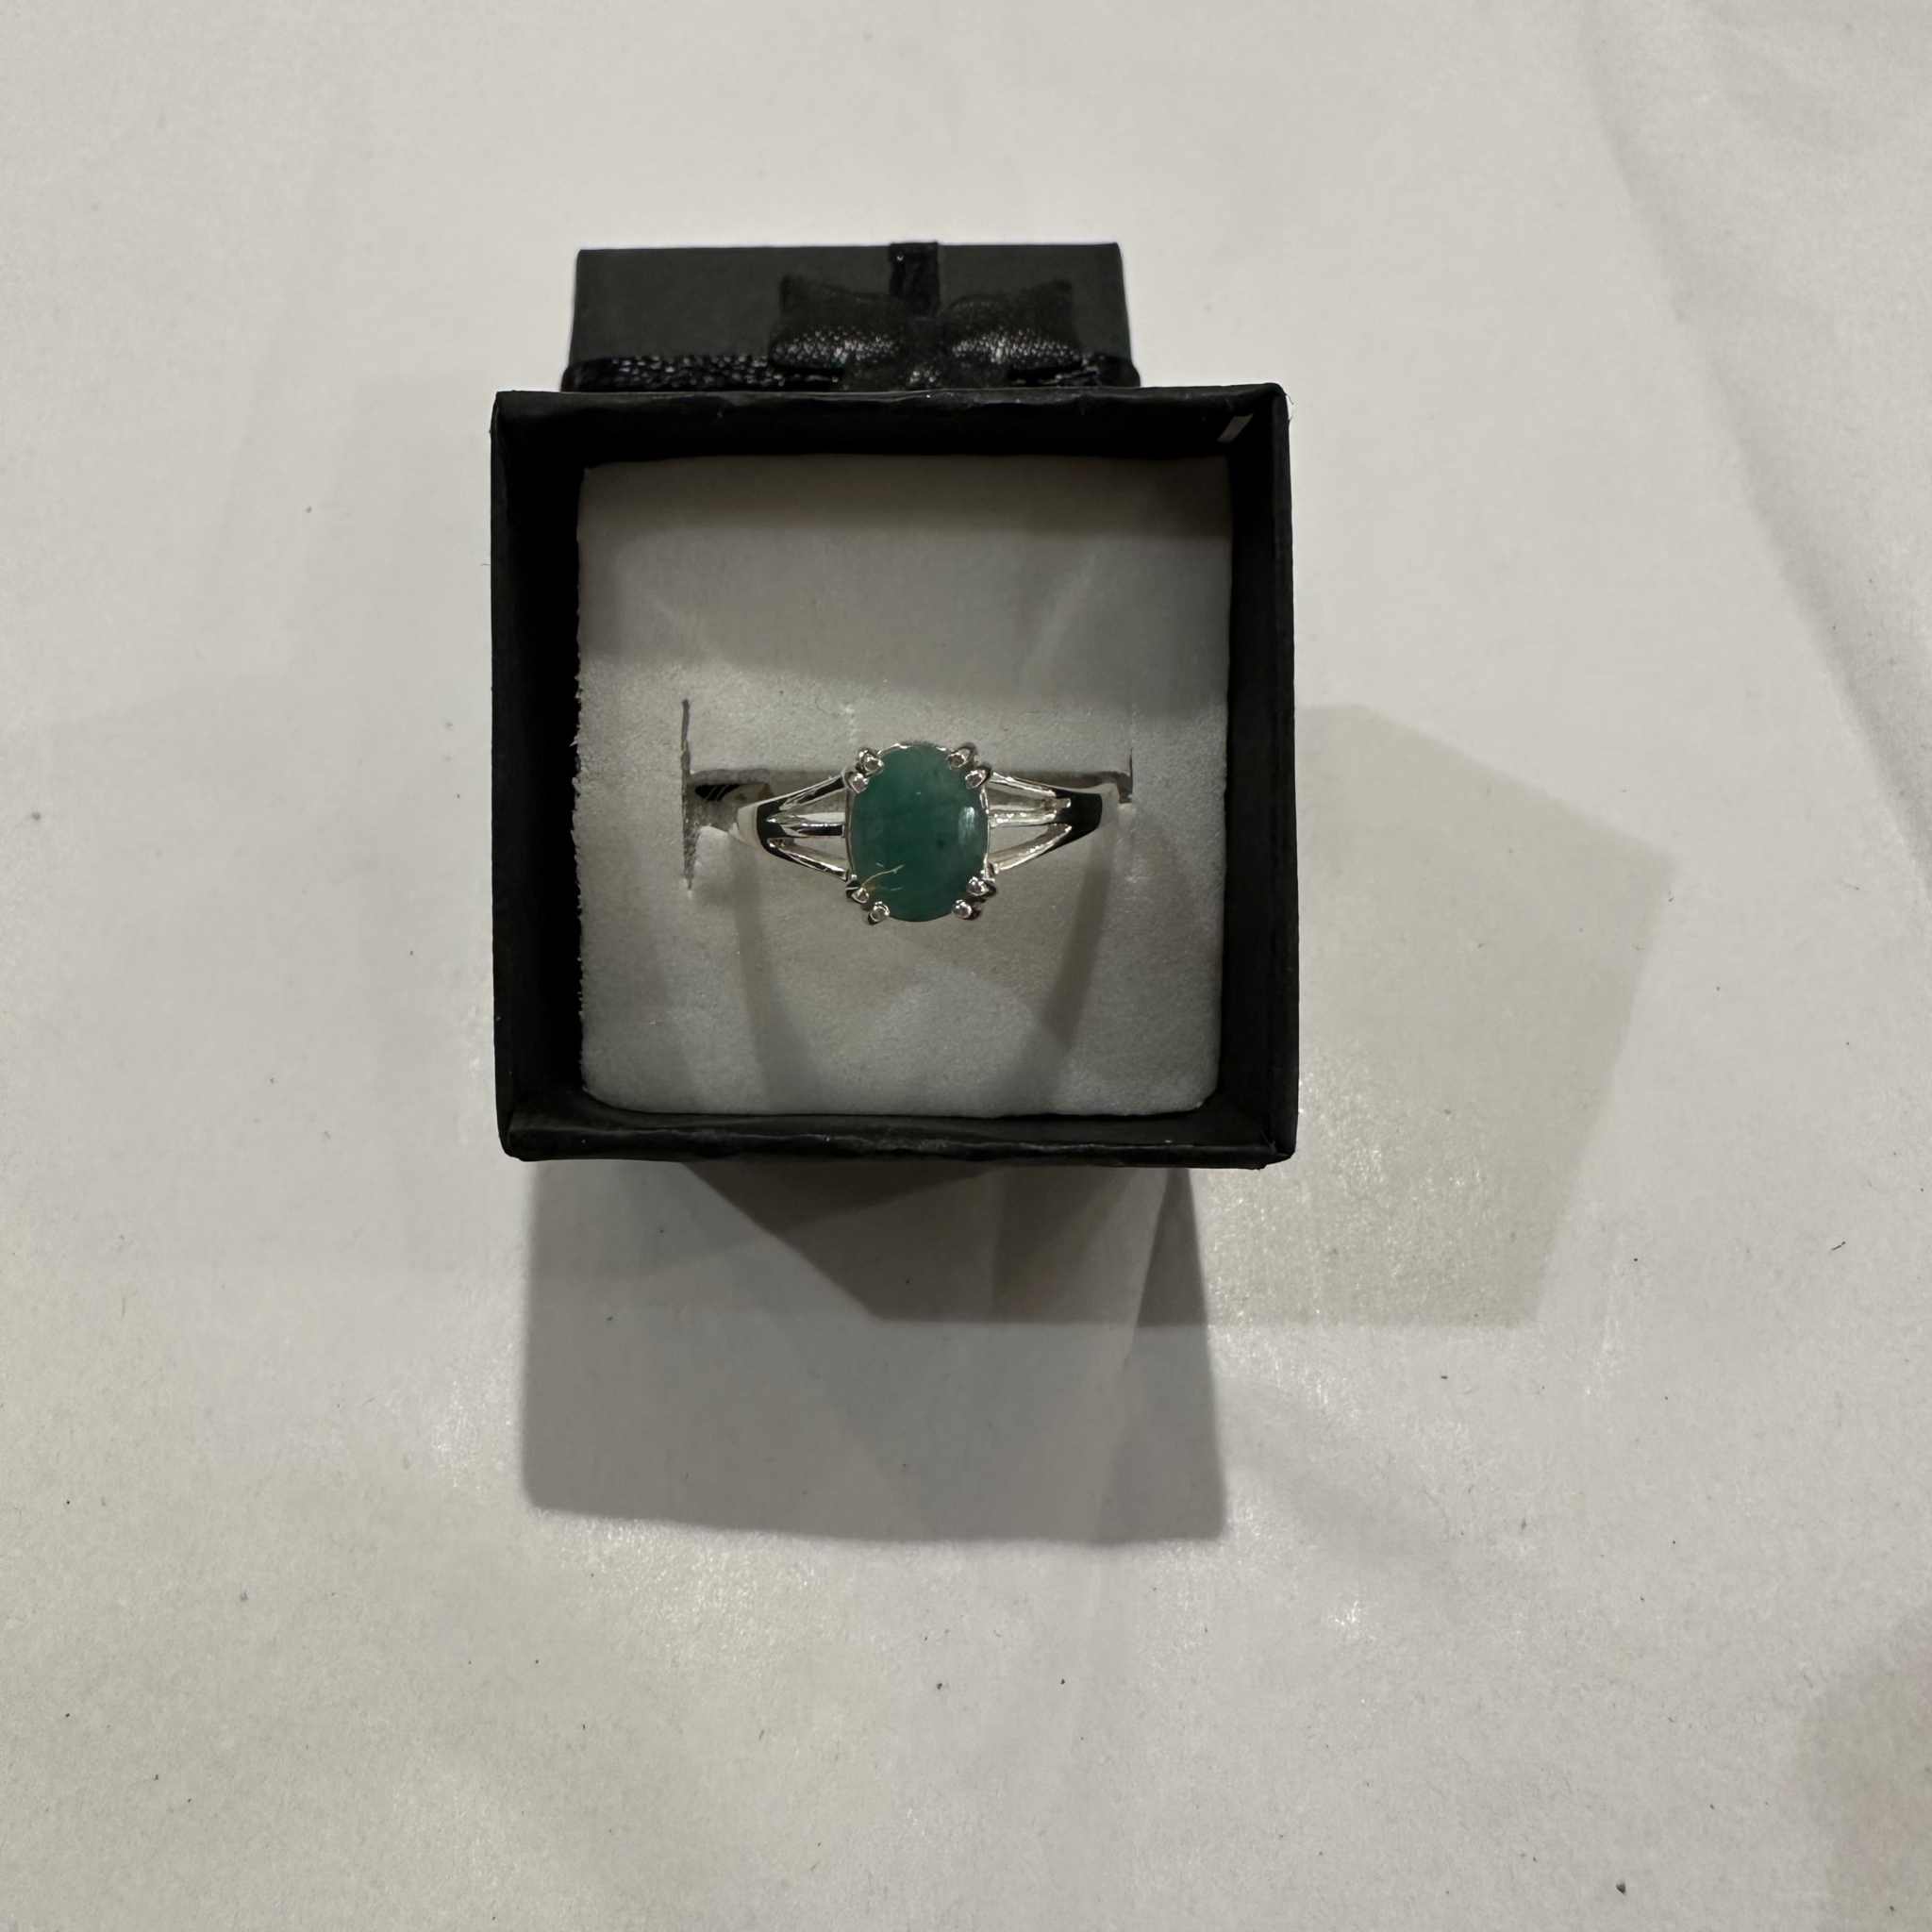 Emerald Ring - Size 9 “Held”